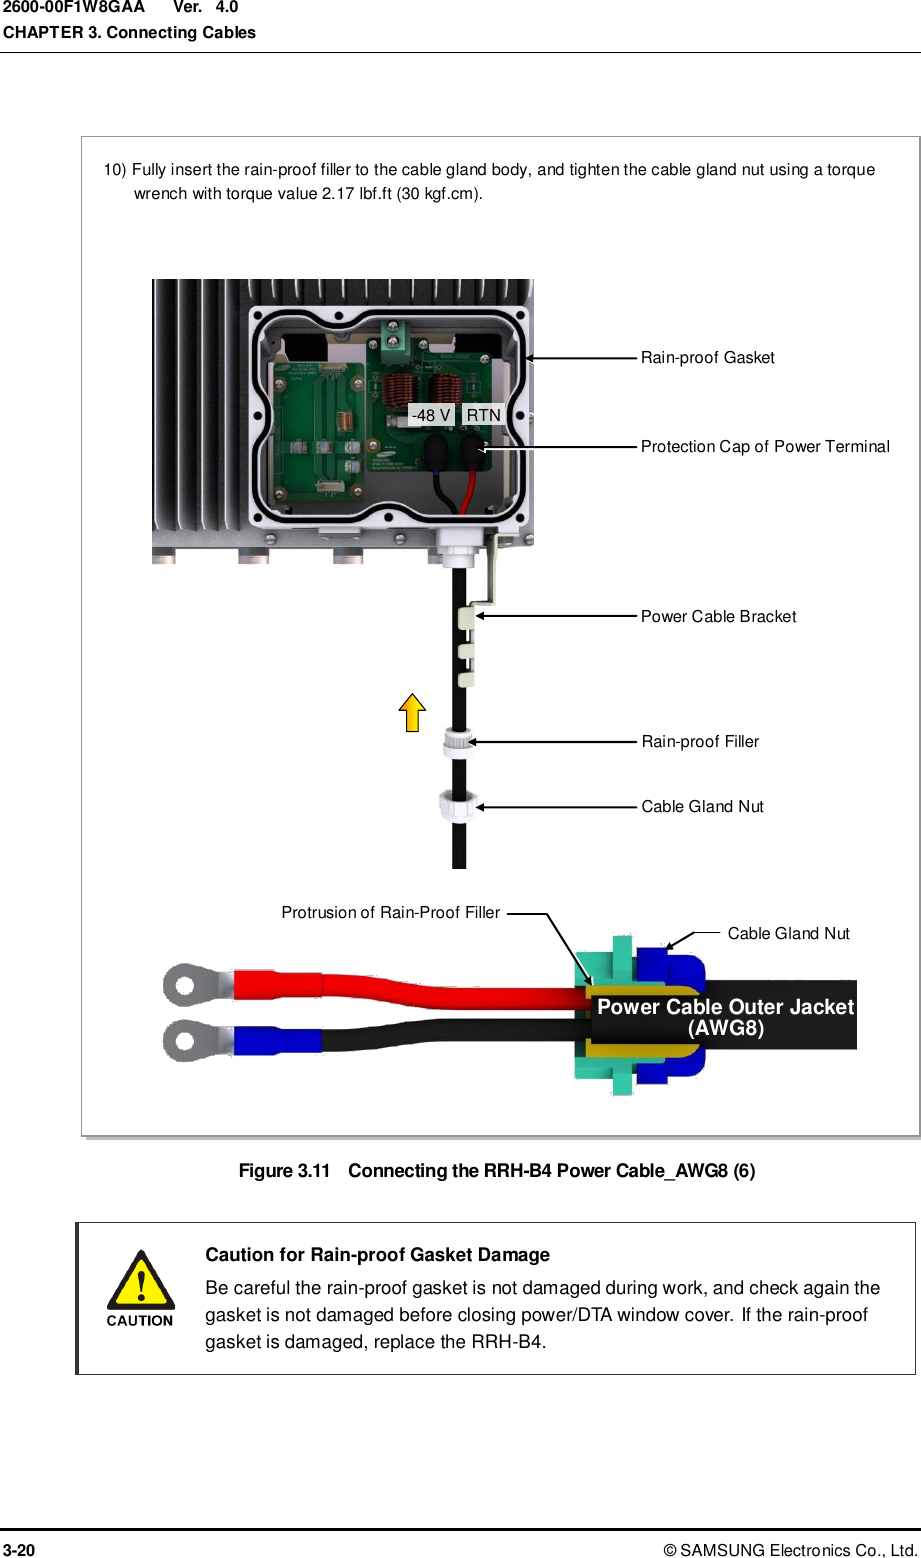  Ver.  CHAPTER 3. Connecting Cables 3-20 ©  SAMSUNG Electronics Co., Ltd. 2600-00F1W8GAA 4.0  Figure 3.11  Connecting the RRH-B4 Power Cable_AWG8 (6)    Caution for Rain-proof Gasket Damage   Be careful the rain-proof gasket is not damaged during work, and check again the gasket is not damaged before closing power/DTA window cover. If the rain-proof gasket is damaged, replace the RRH-B4.  Rain-proof Filler 10) Fully insert the rain-proof filler to the cable gland body, and tighten the cable gland nut using a torque wrench with torque value 2.17 lbf.ft (30 kgf.cm). Protrusion of Rain-Proof Filler Cable Gland Nut Power Cable Bracket  RTN -48 V Power Cable Outer Jacket   (AWG8) Cable Gland Nut Rain-proof Gasket  Protection Cap of Power Terminal 